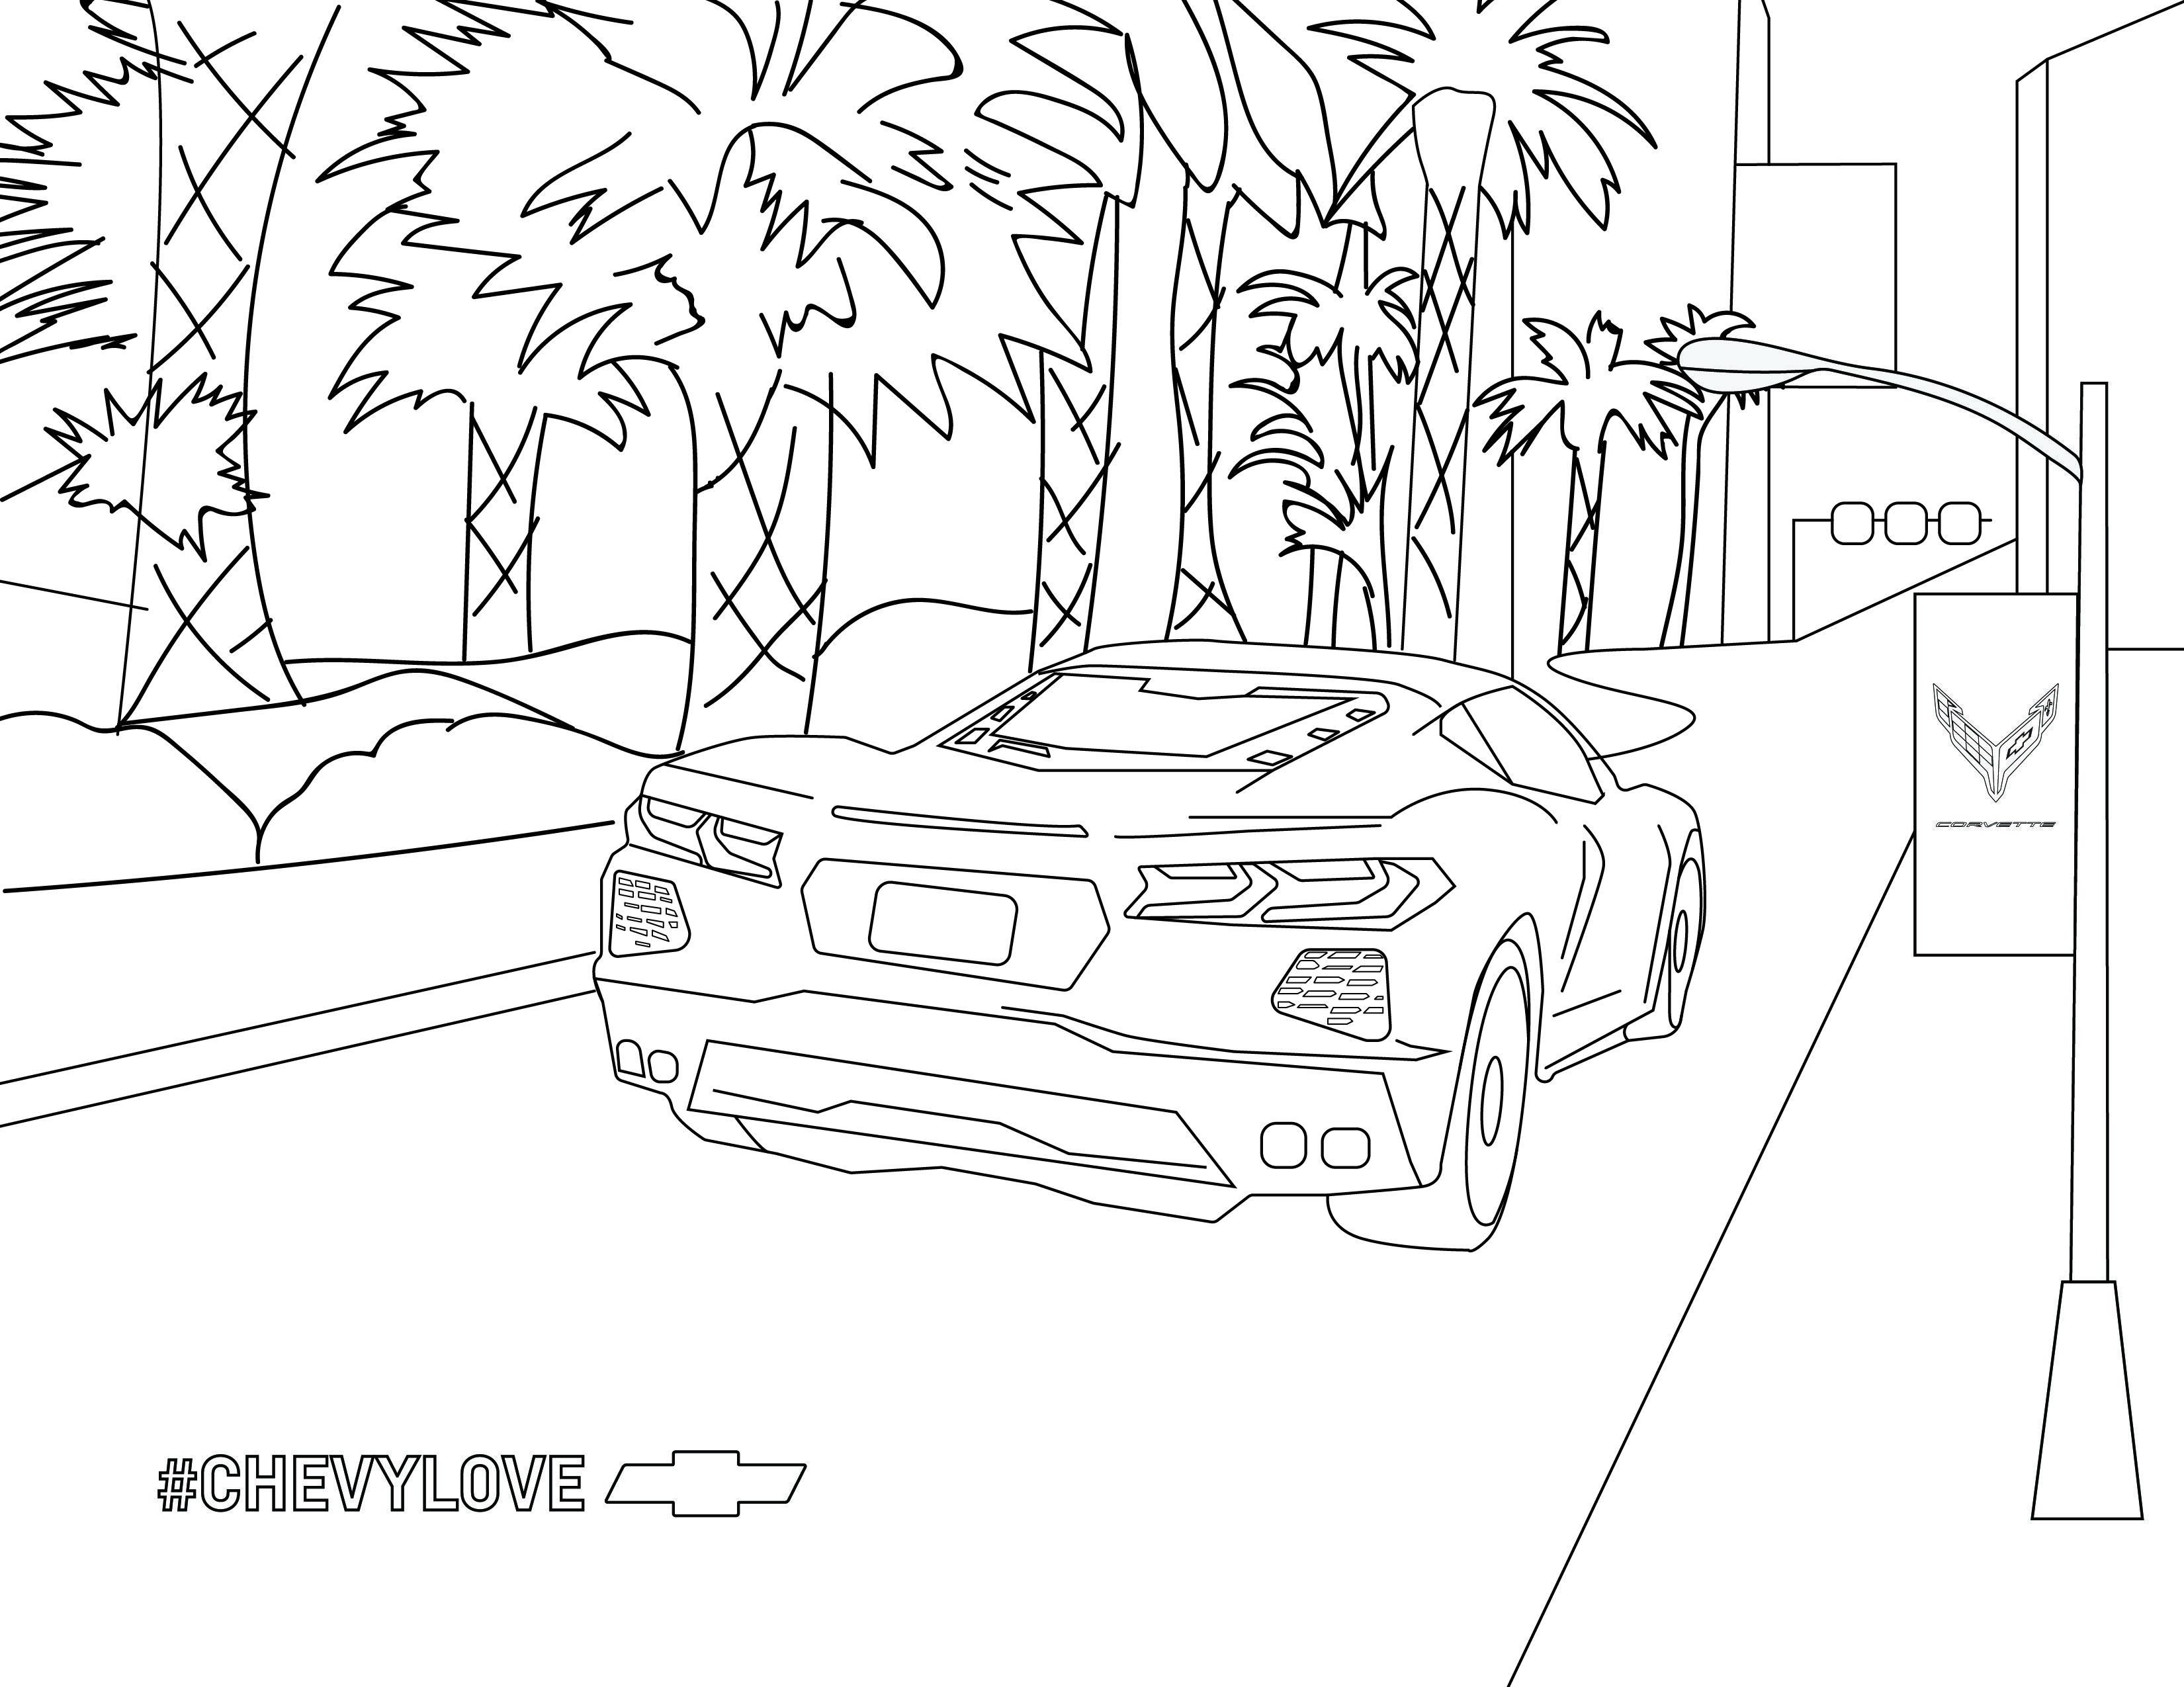 cars halloween coloring pages